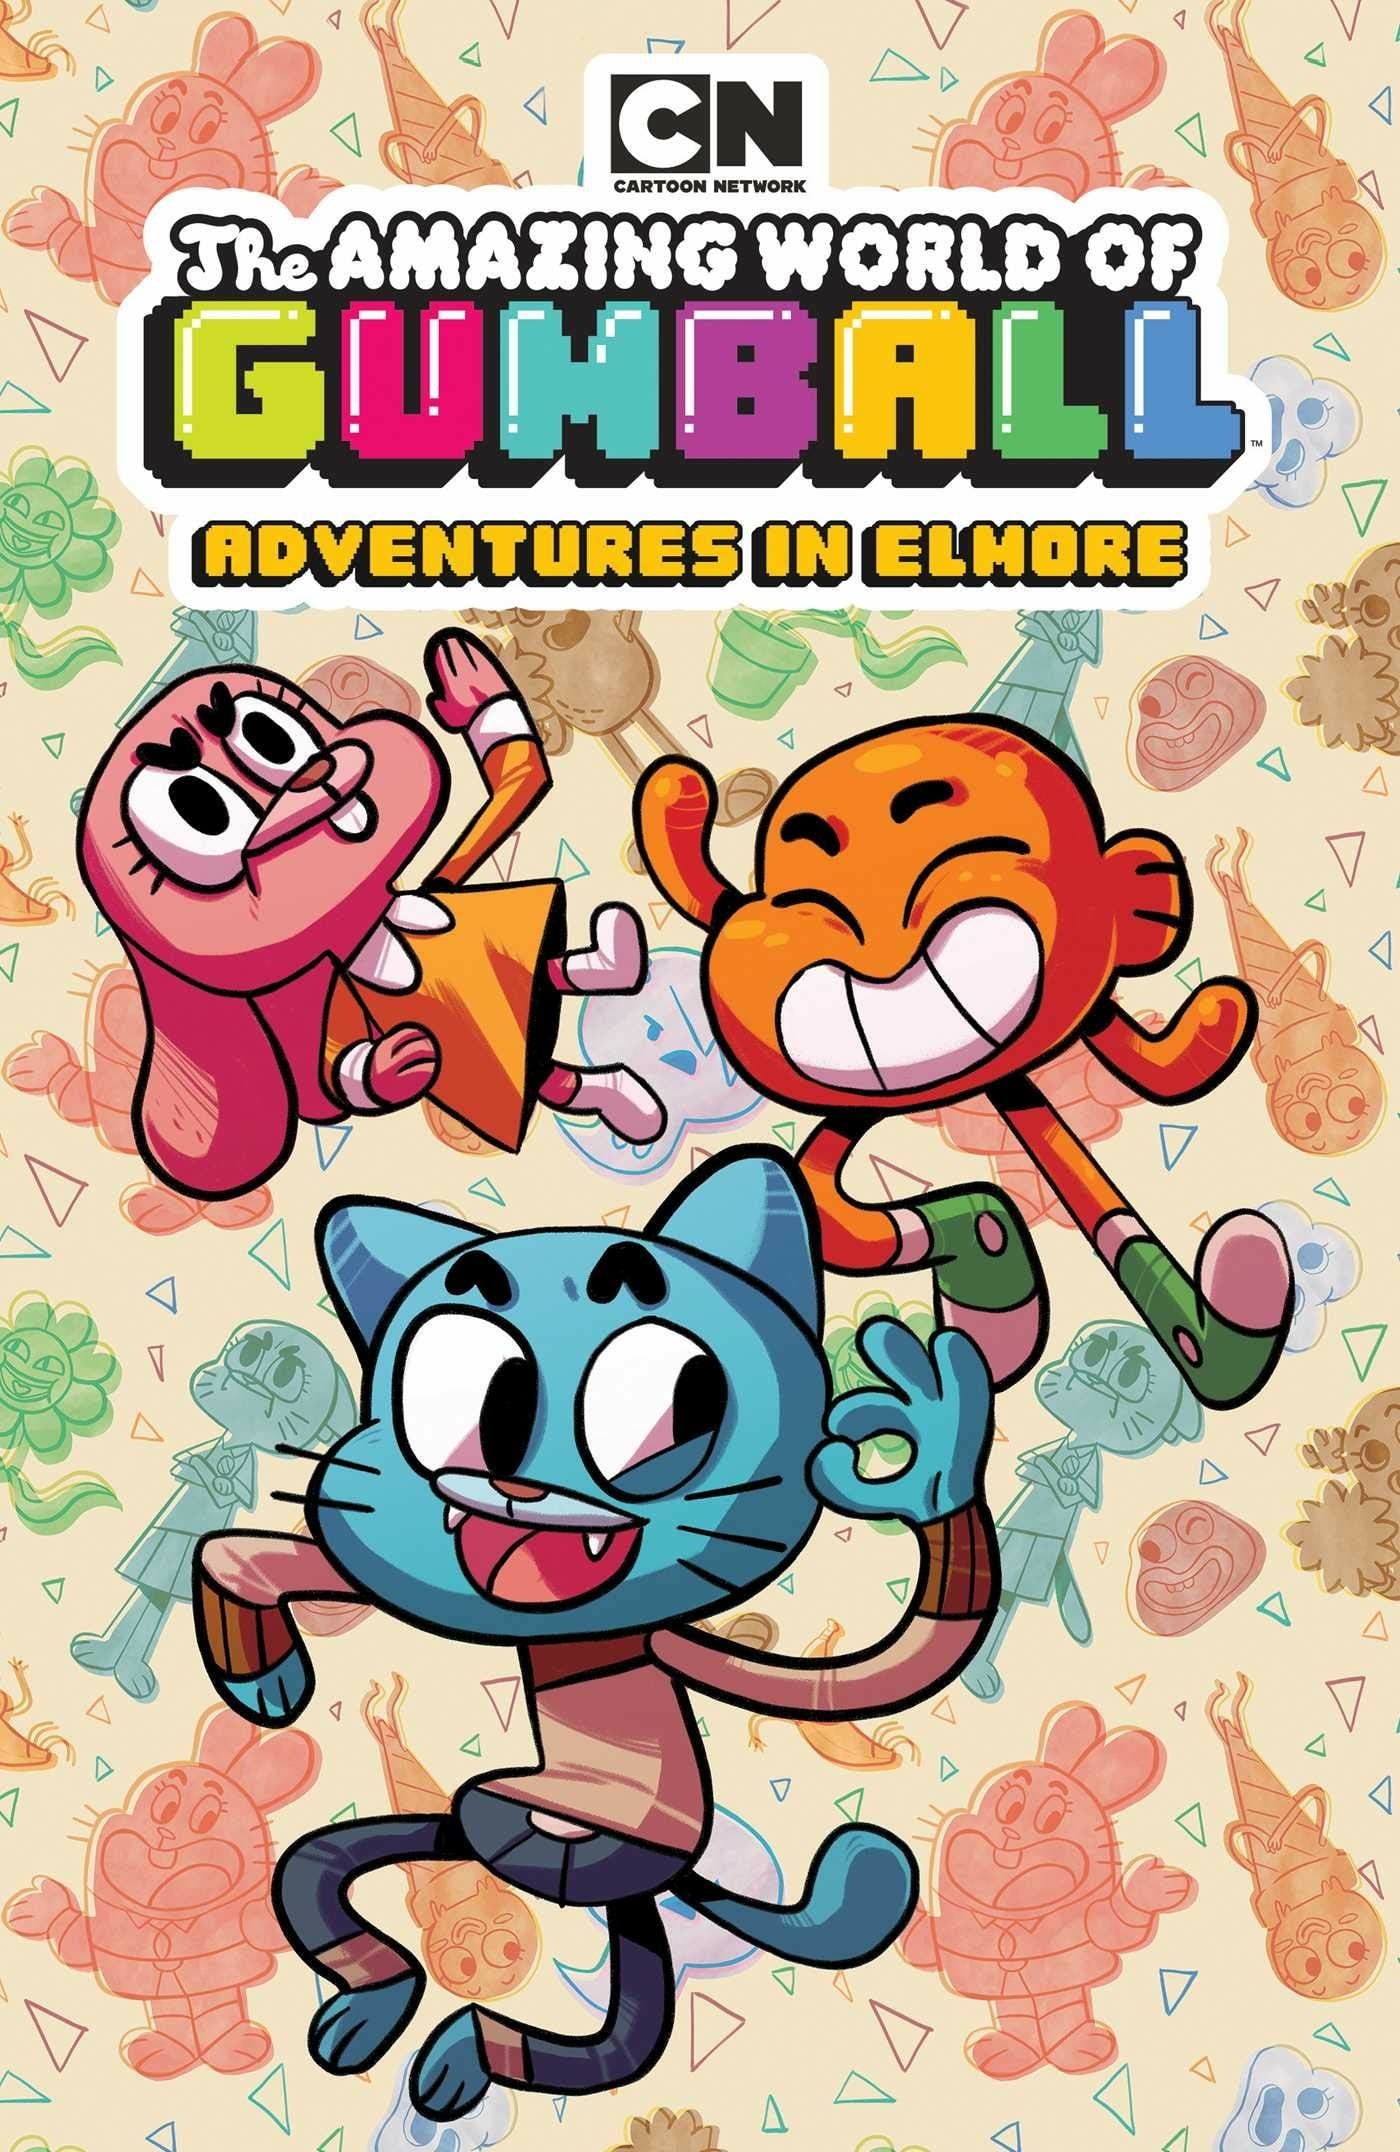 The Amazing World of Gumball Picture